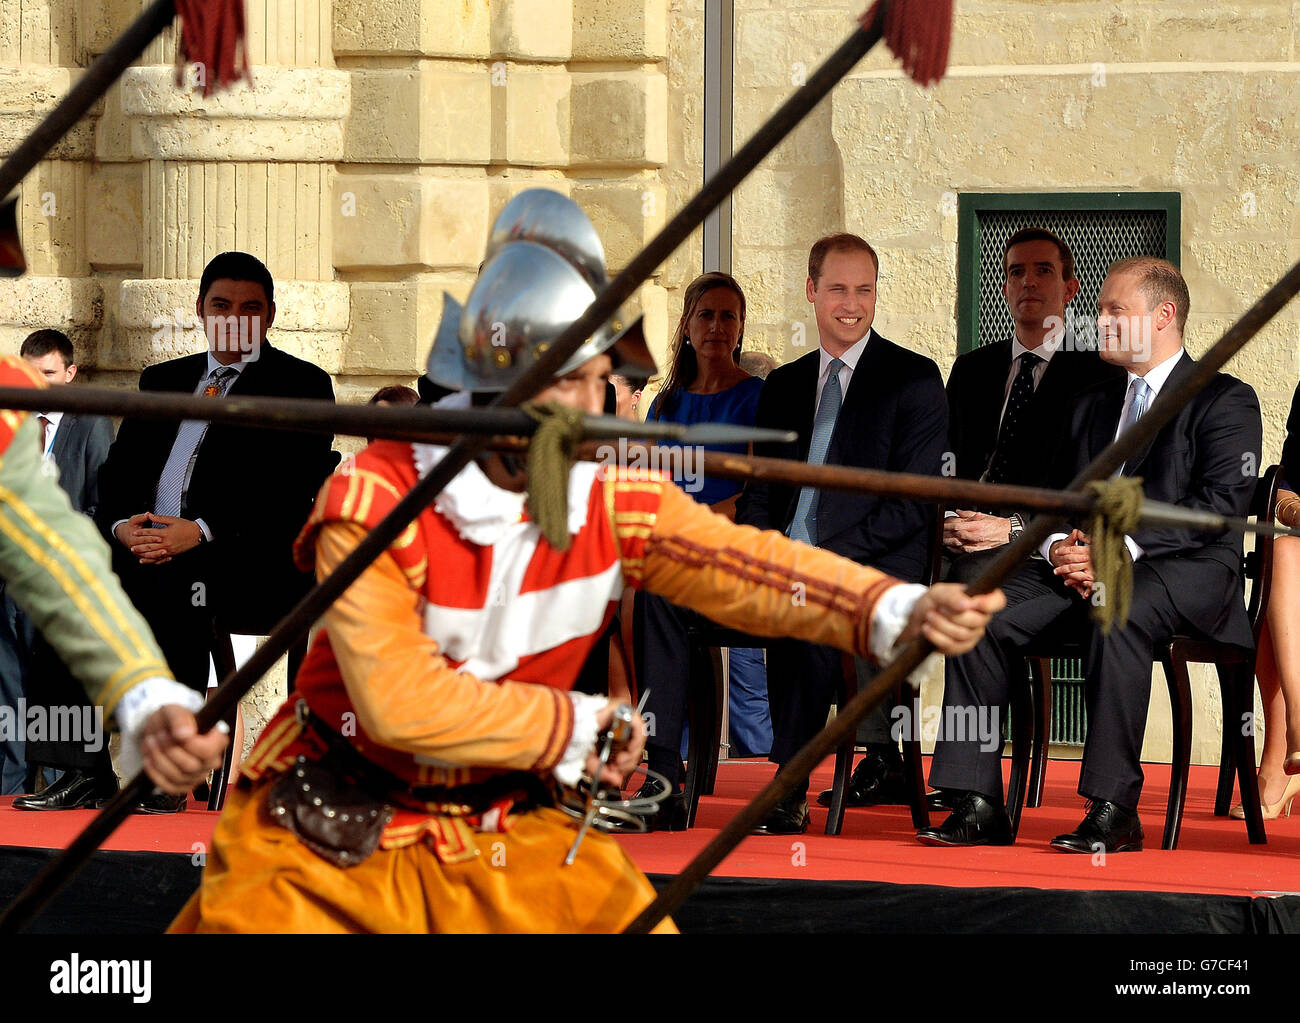 The Duke of Cambridge (third right) watches a re-enactment of an historical event, in Valletta, Malta, marking the 50th anniversary of its independence. Stock Photo